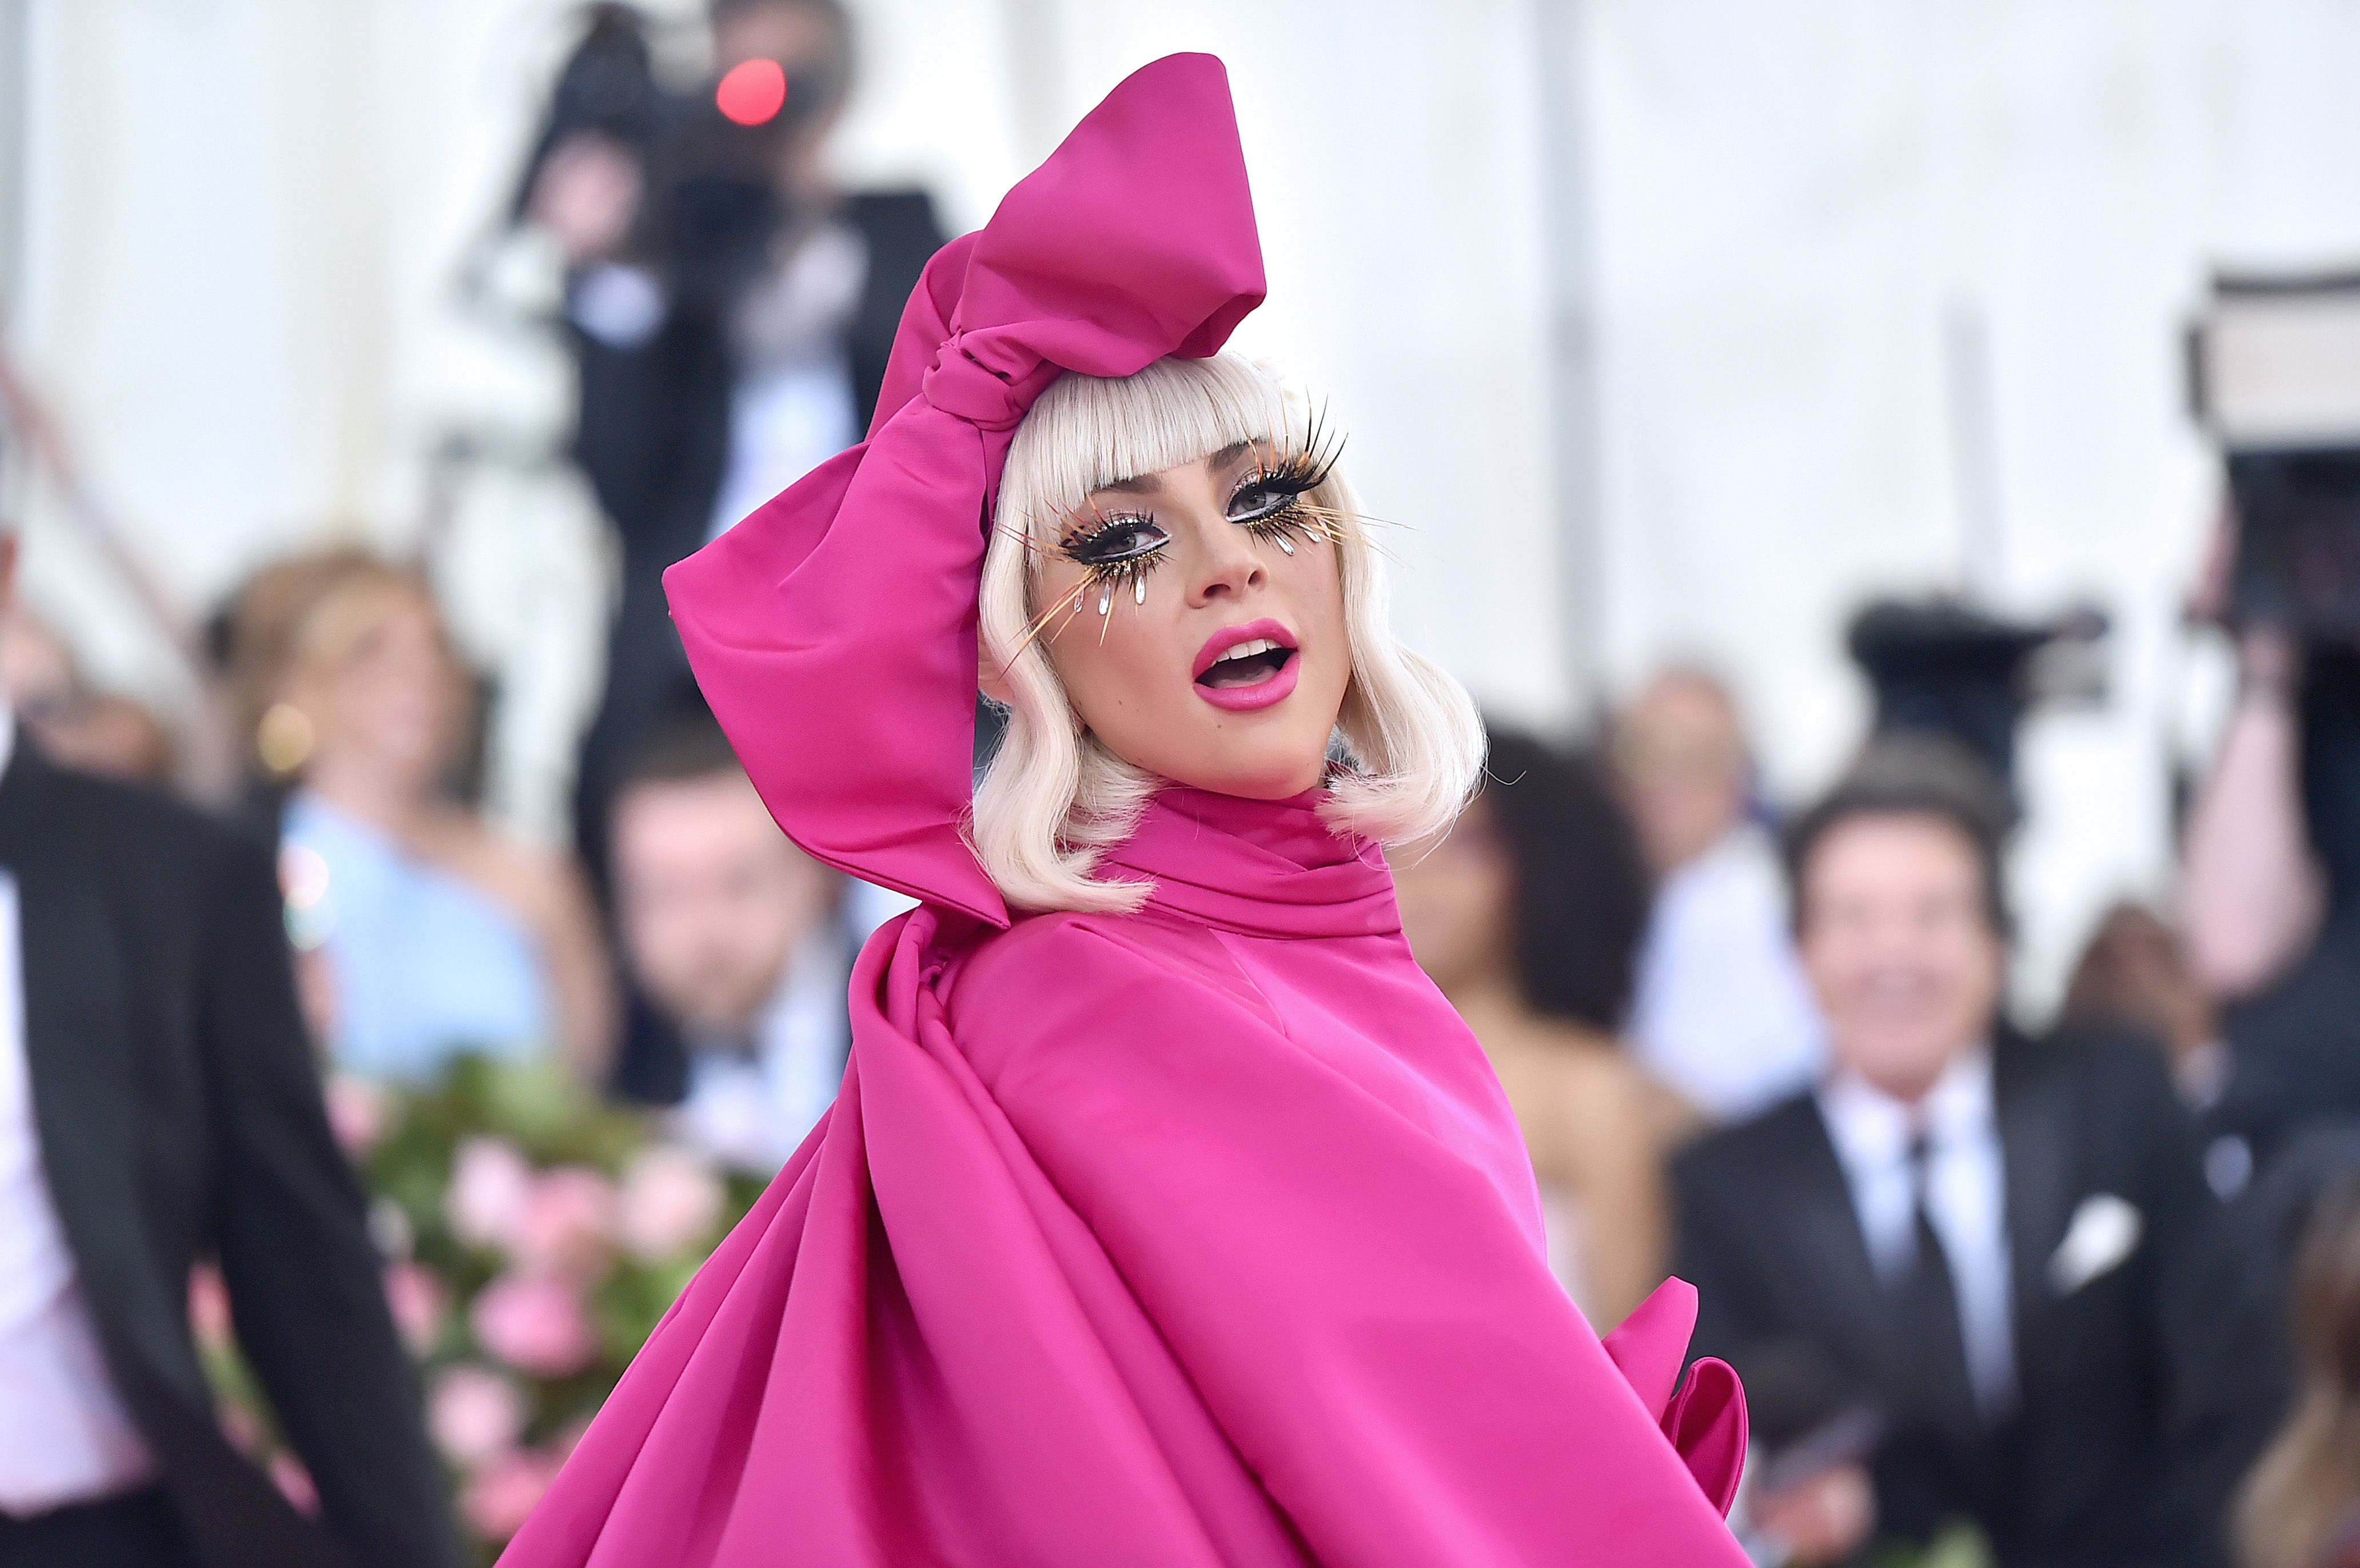 Confirmed, No Met Gala This Year! - FLAIR MAGAZINE